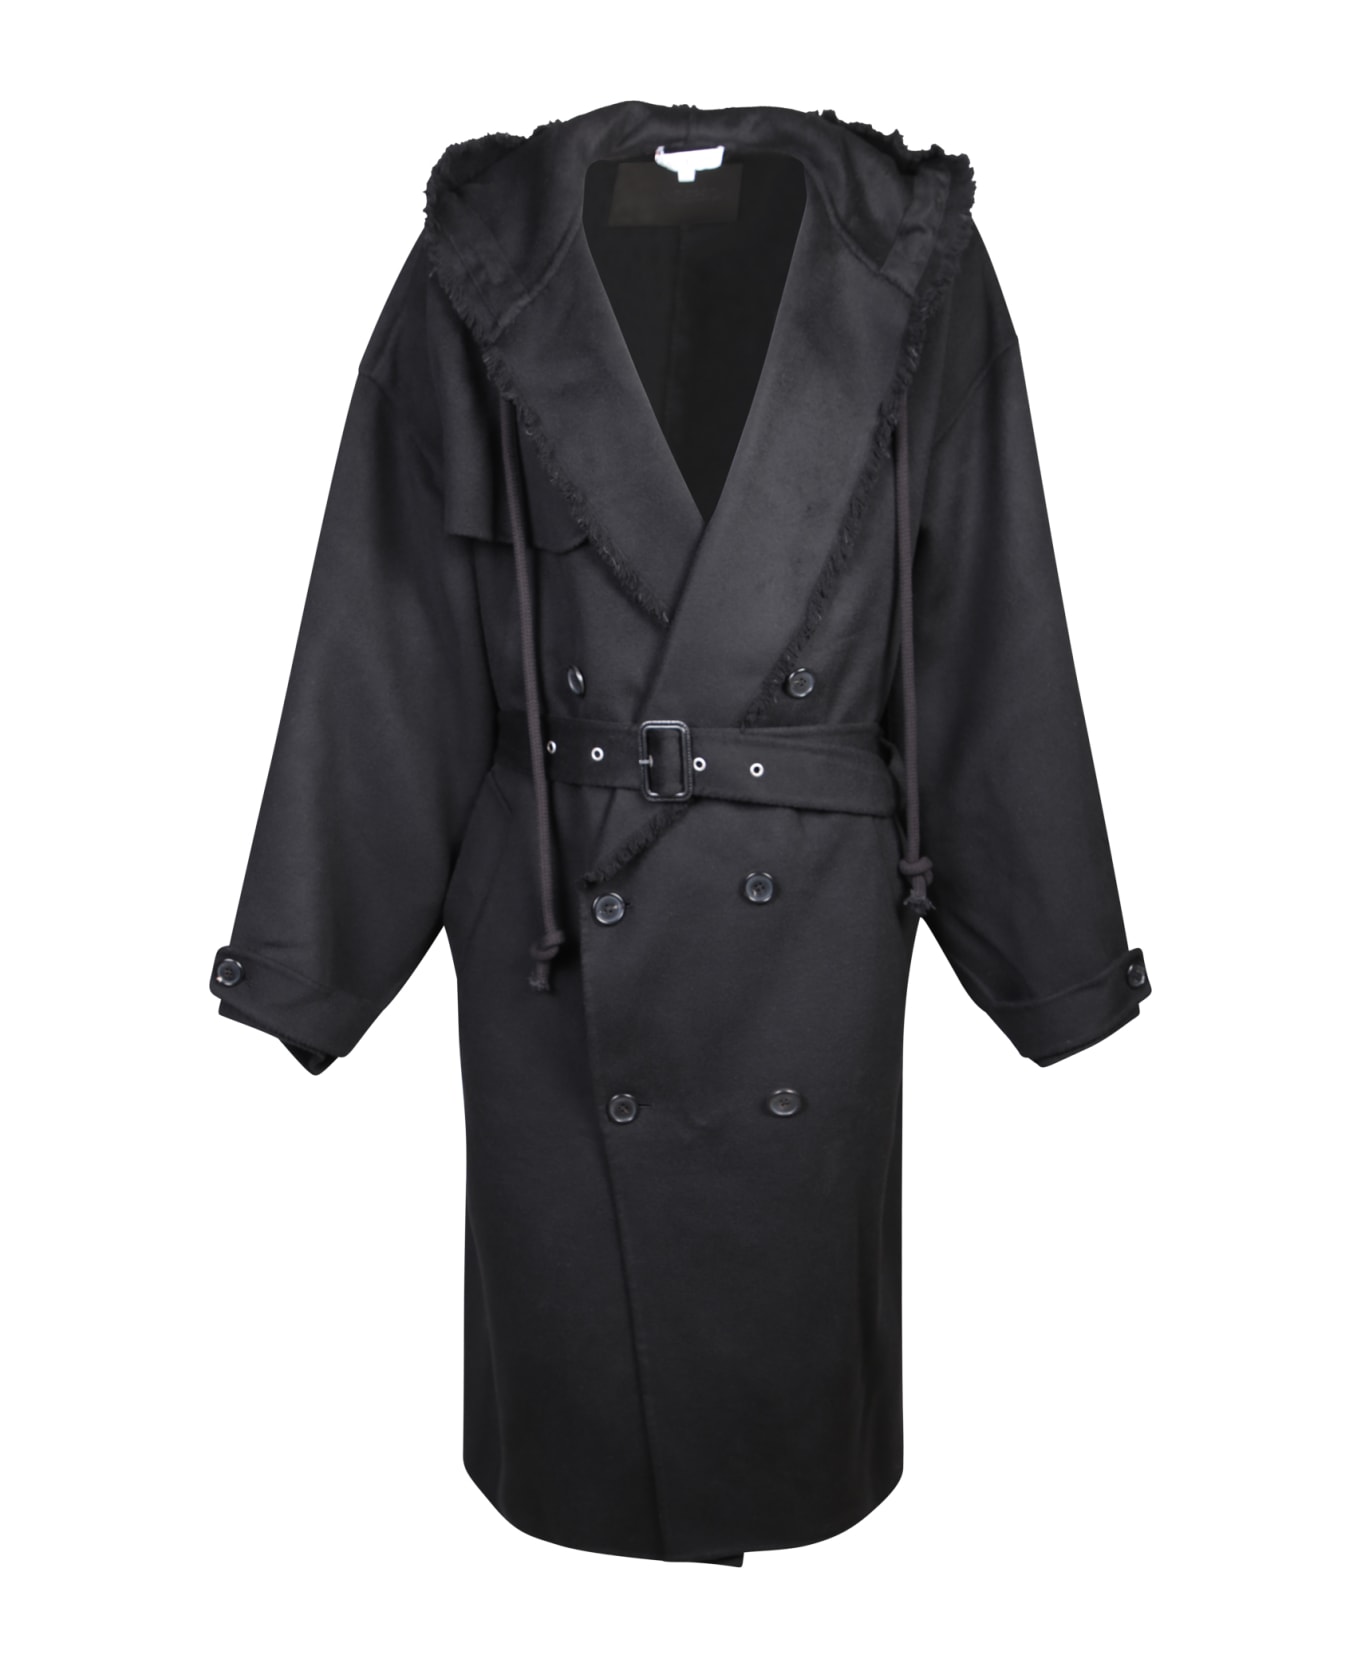 J.W. Anderson Hooded Black Trench Coat - Black